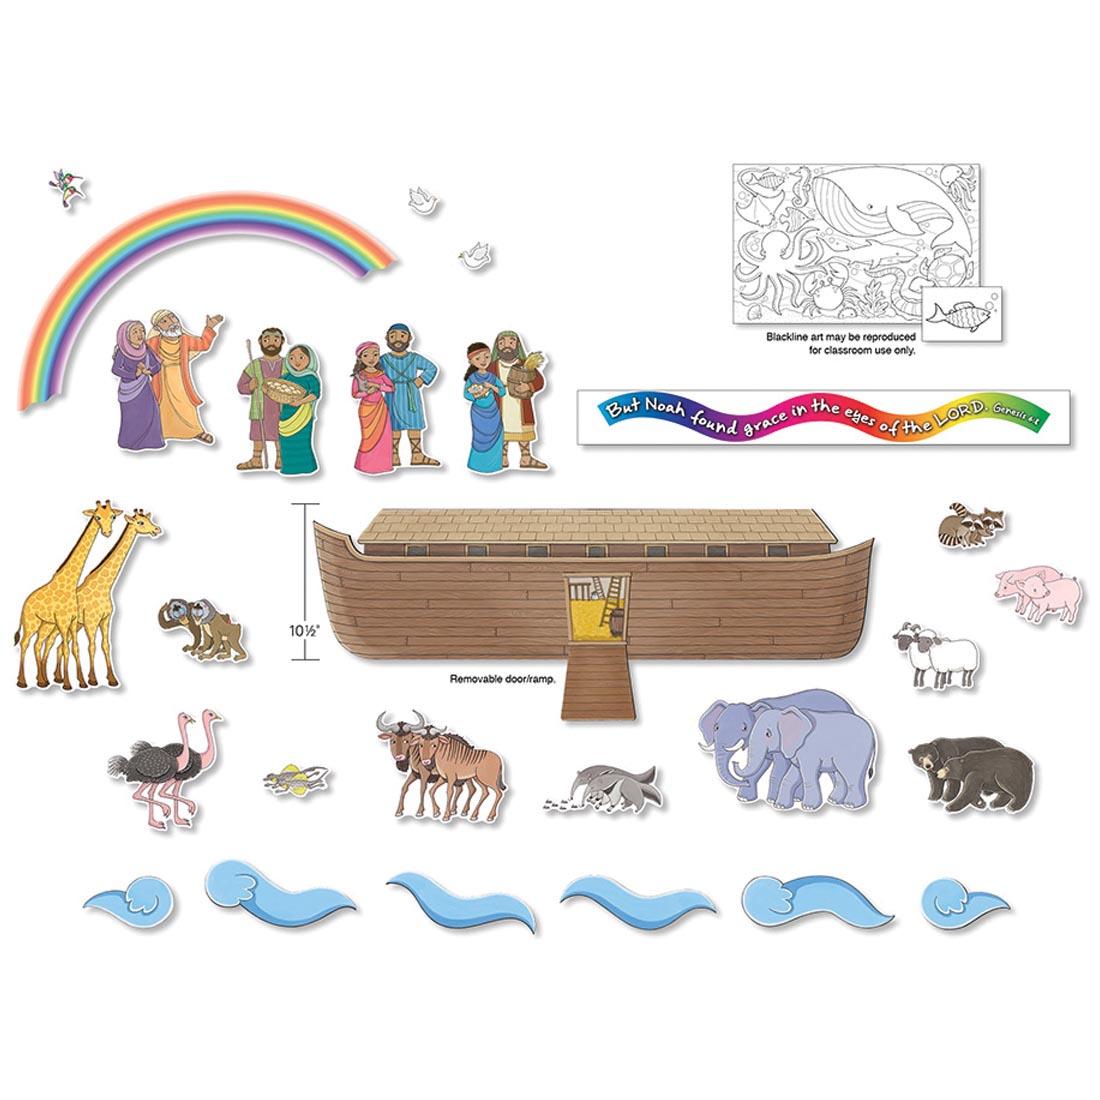 Noah's Ark Bulletin Board Set By North Star Teacher Resources with the text Blackline art may be reproduced for classroom use only. Removeable door/ramp